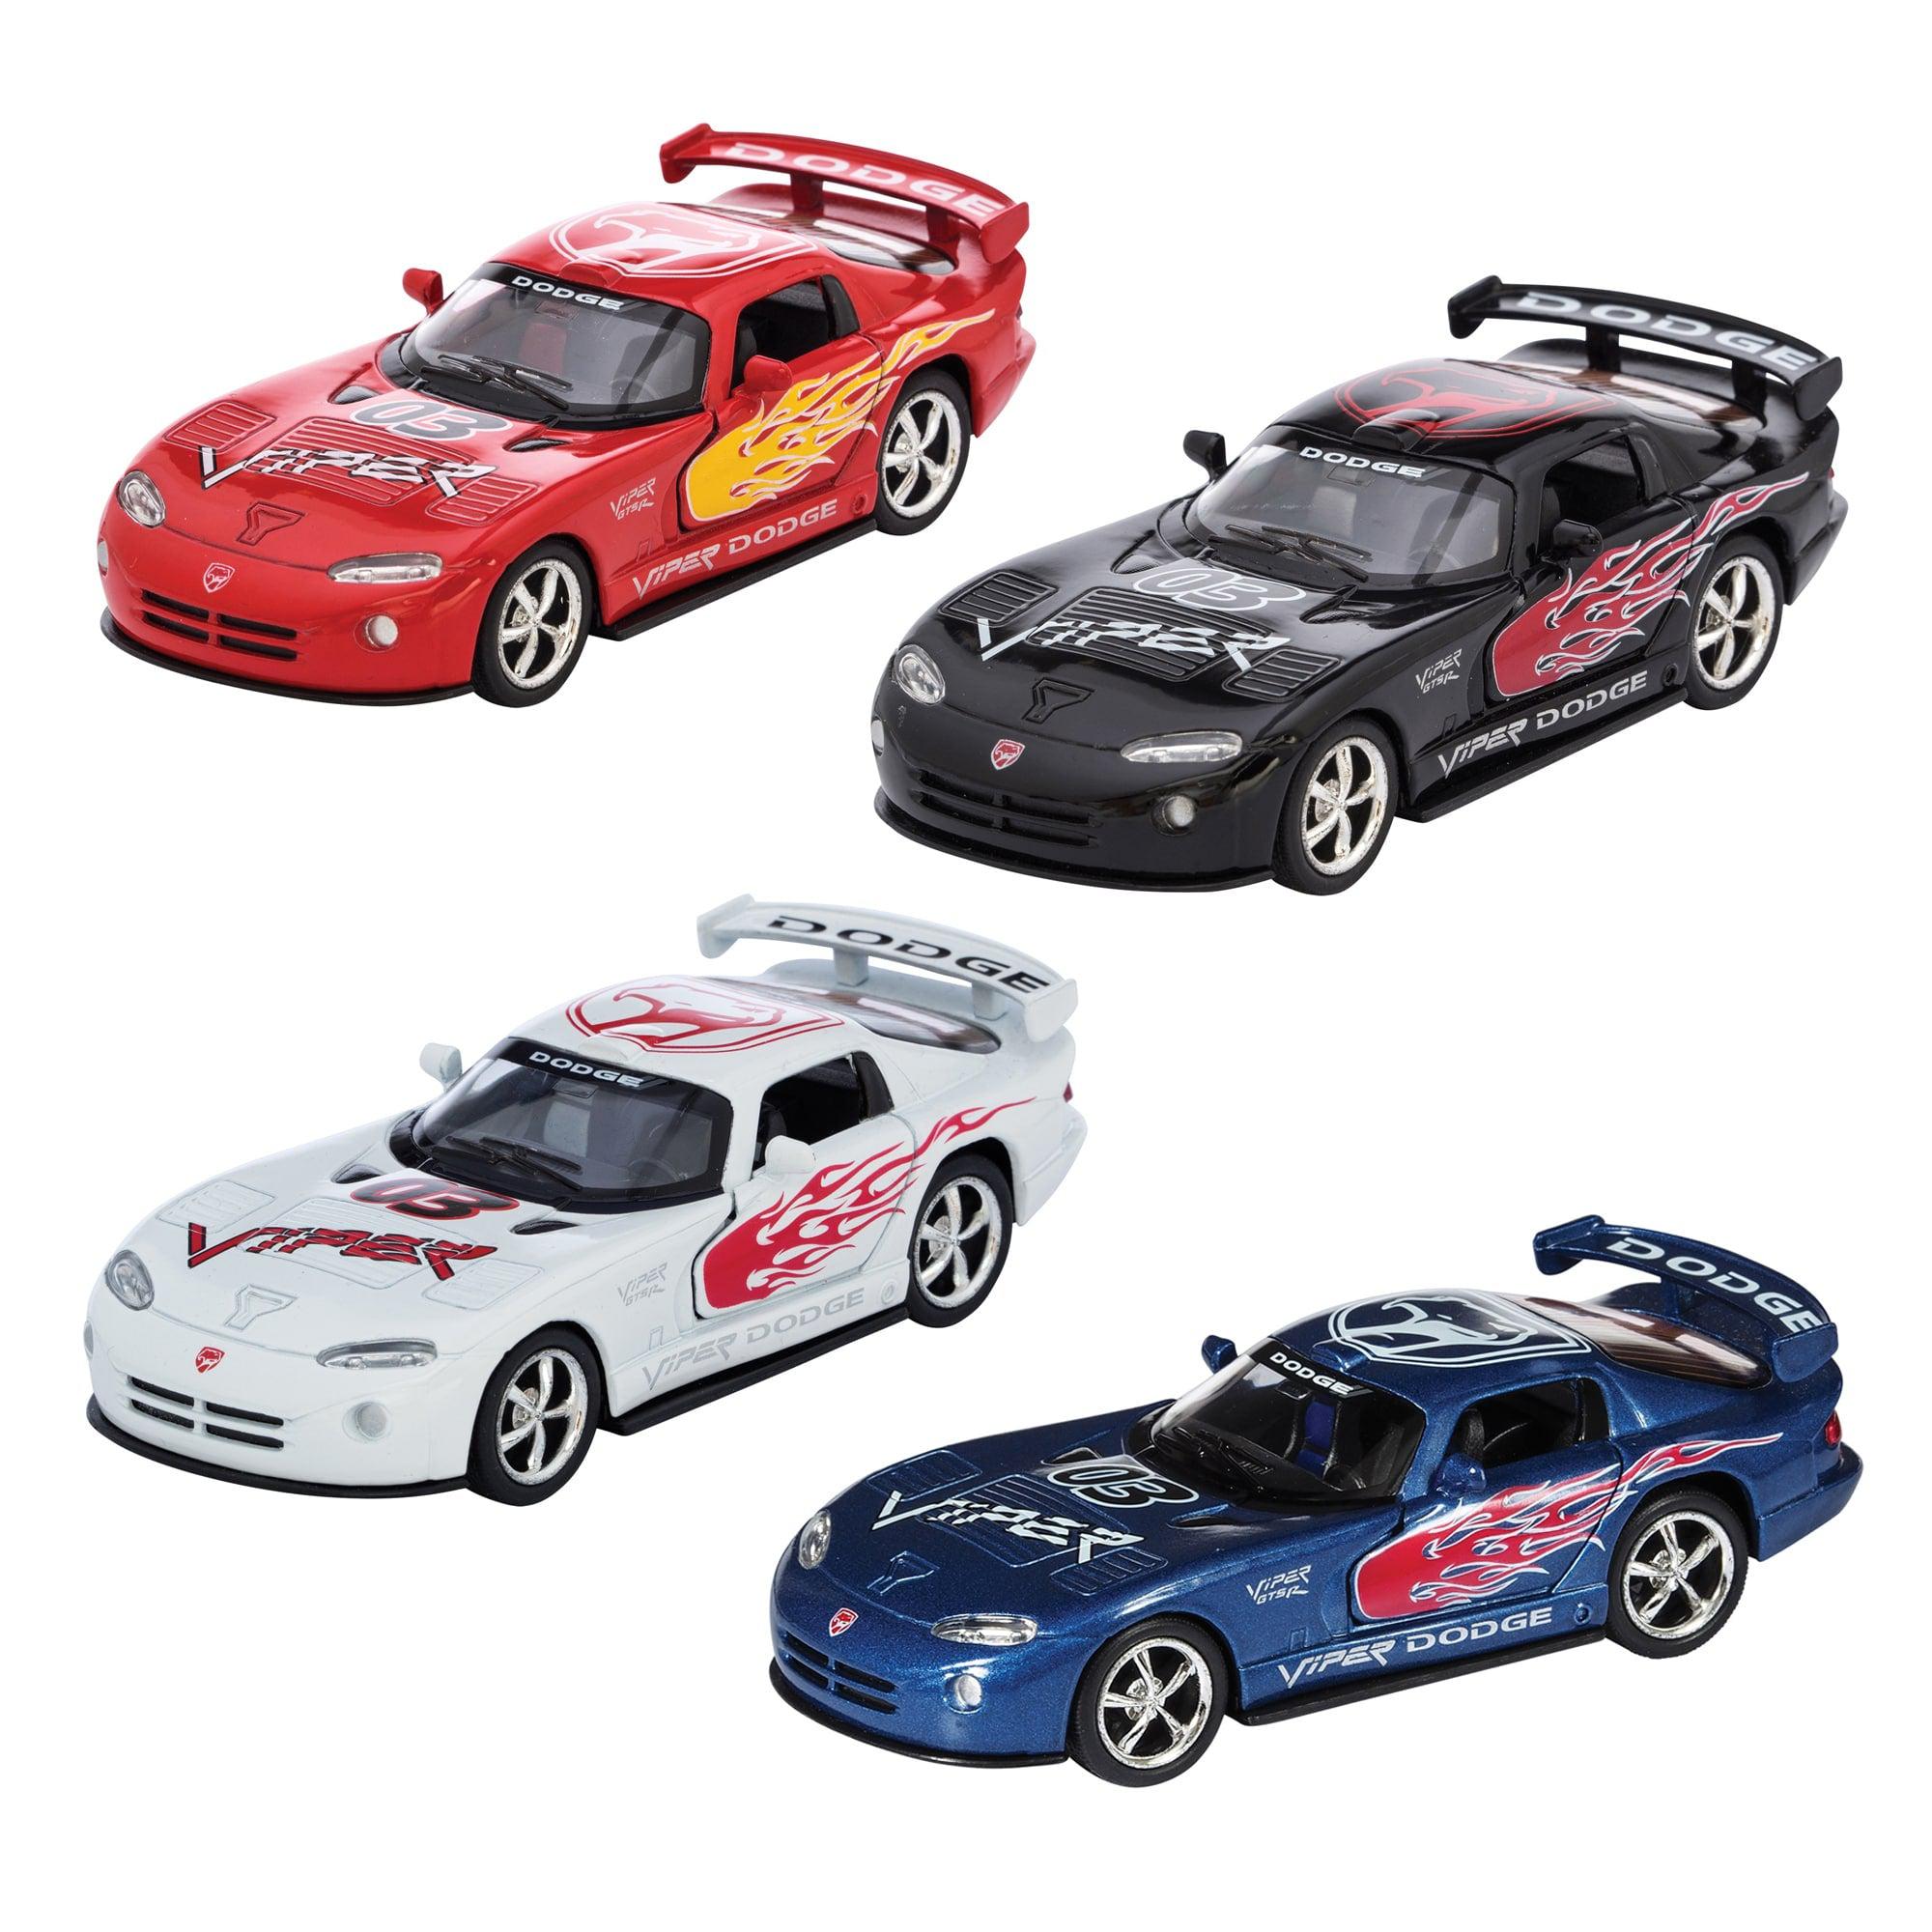 Dodge Viper-Vehicles & Transportation-Yellow Springs Toy Company